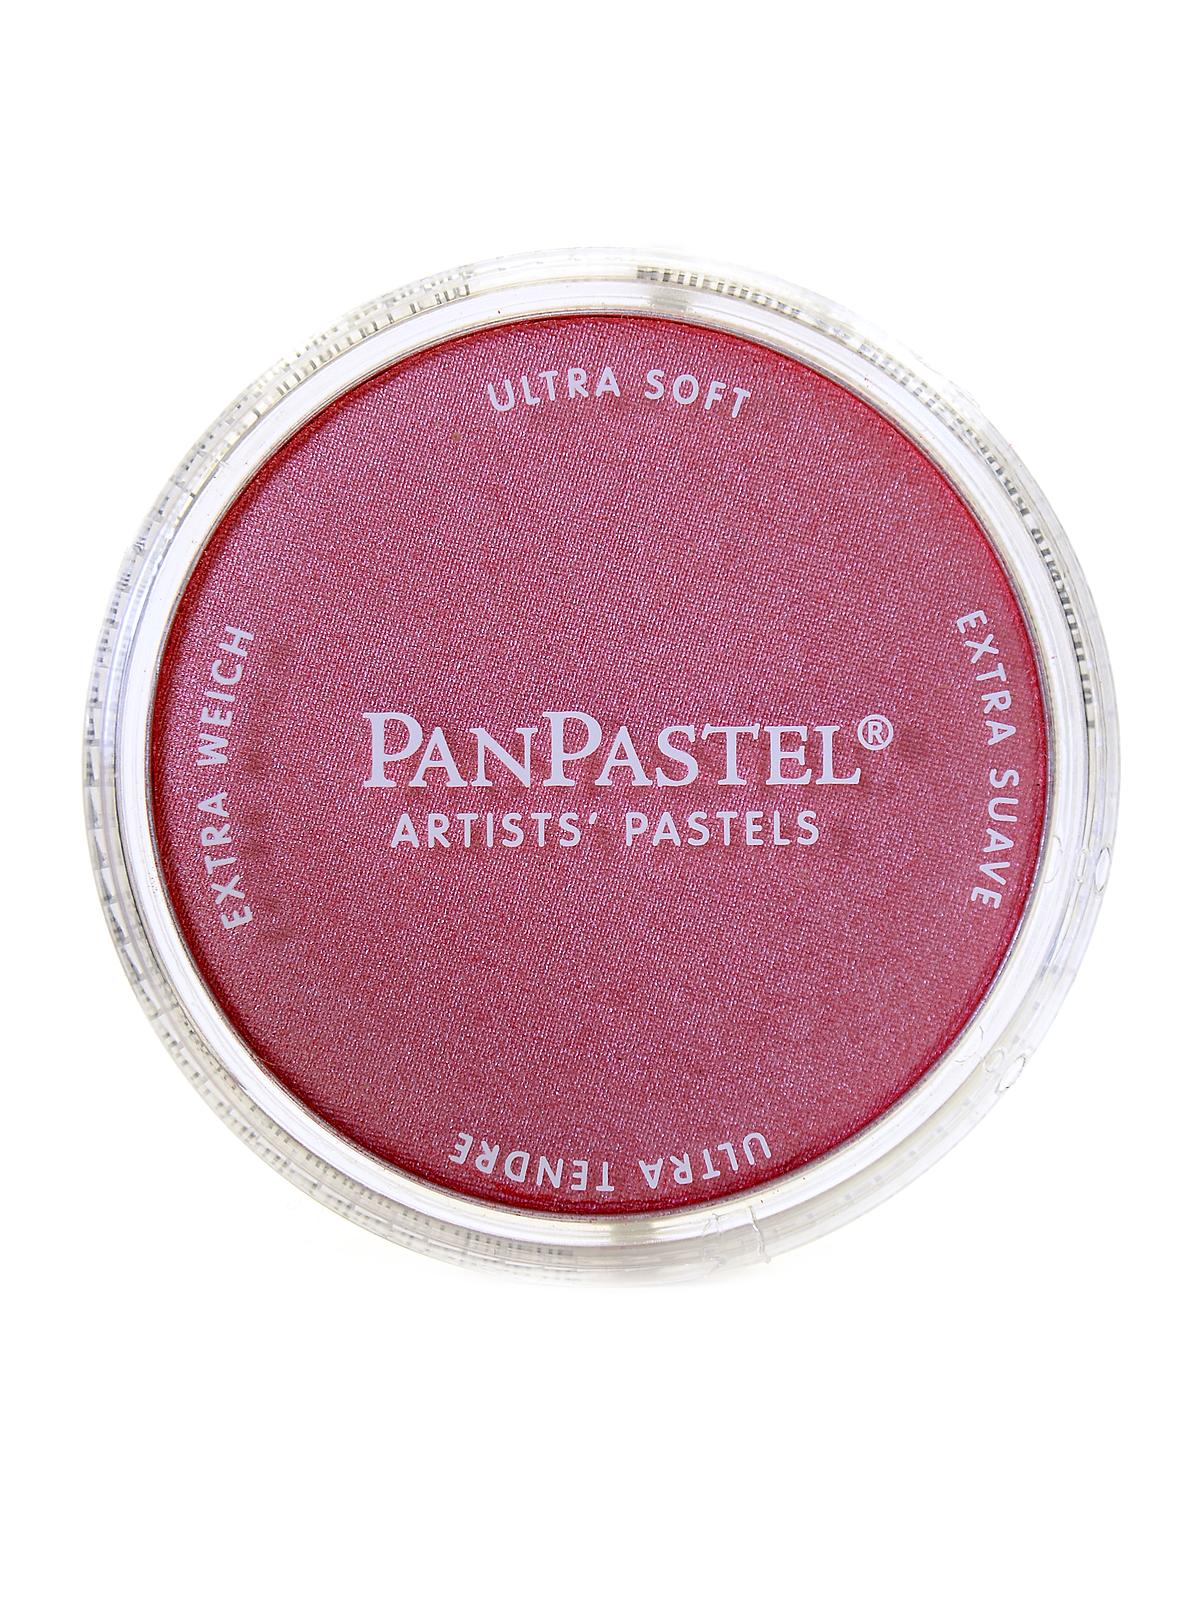 Artists' Pastels Pearlescent Red 953.5 9 Ml